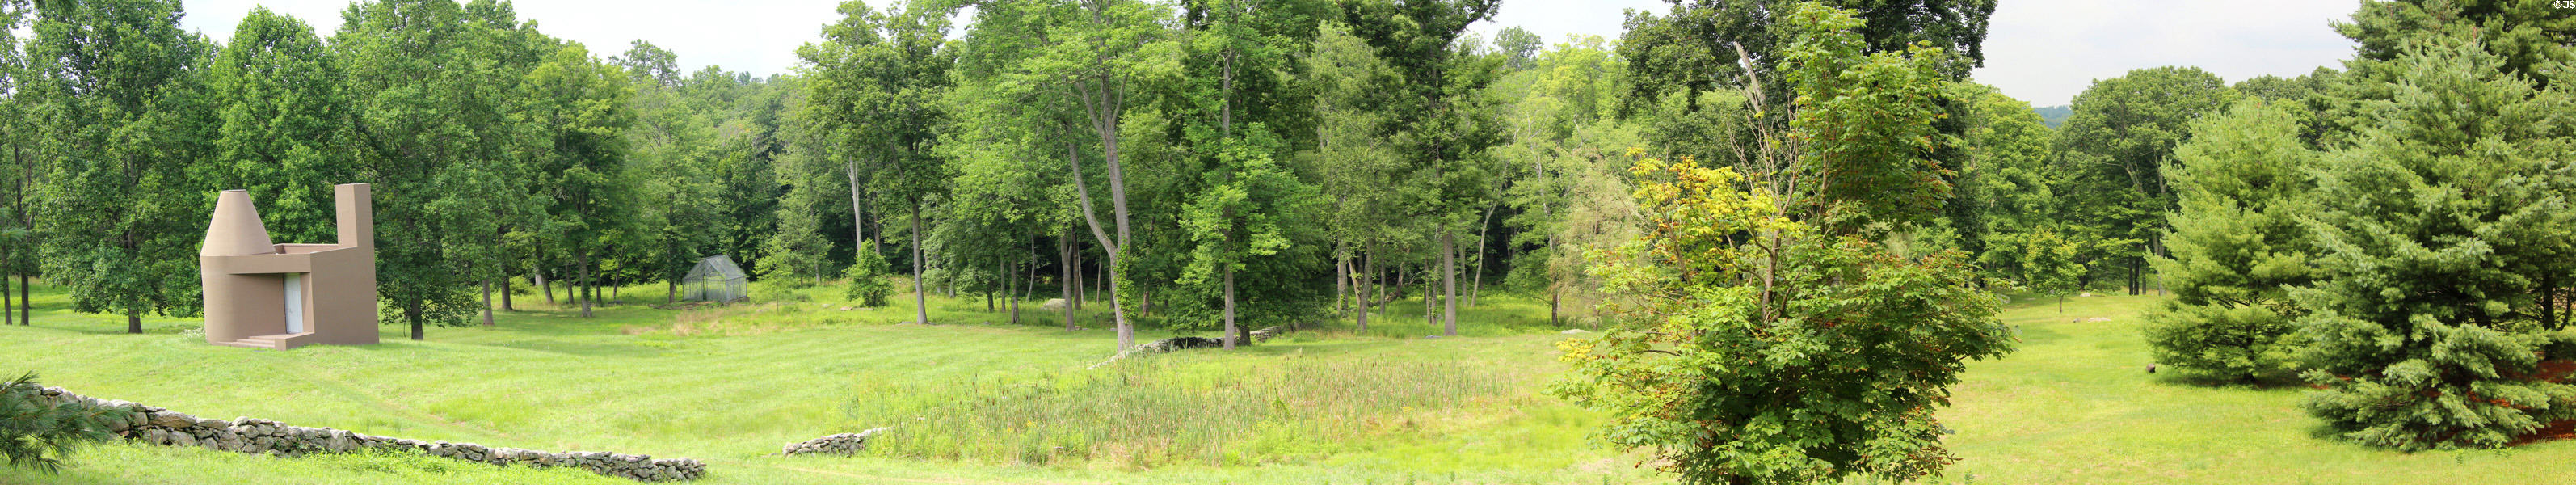 Panorama of stone walls & tree gaps which Johnson considered part of landscape design at Philip Johnson Glass House. New Canaan, CT.